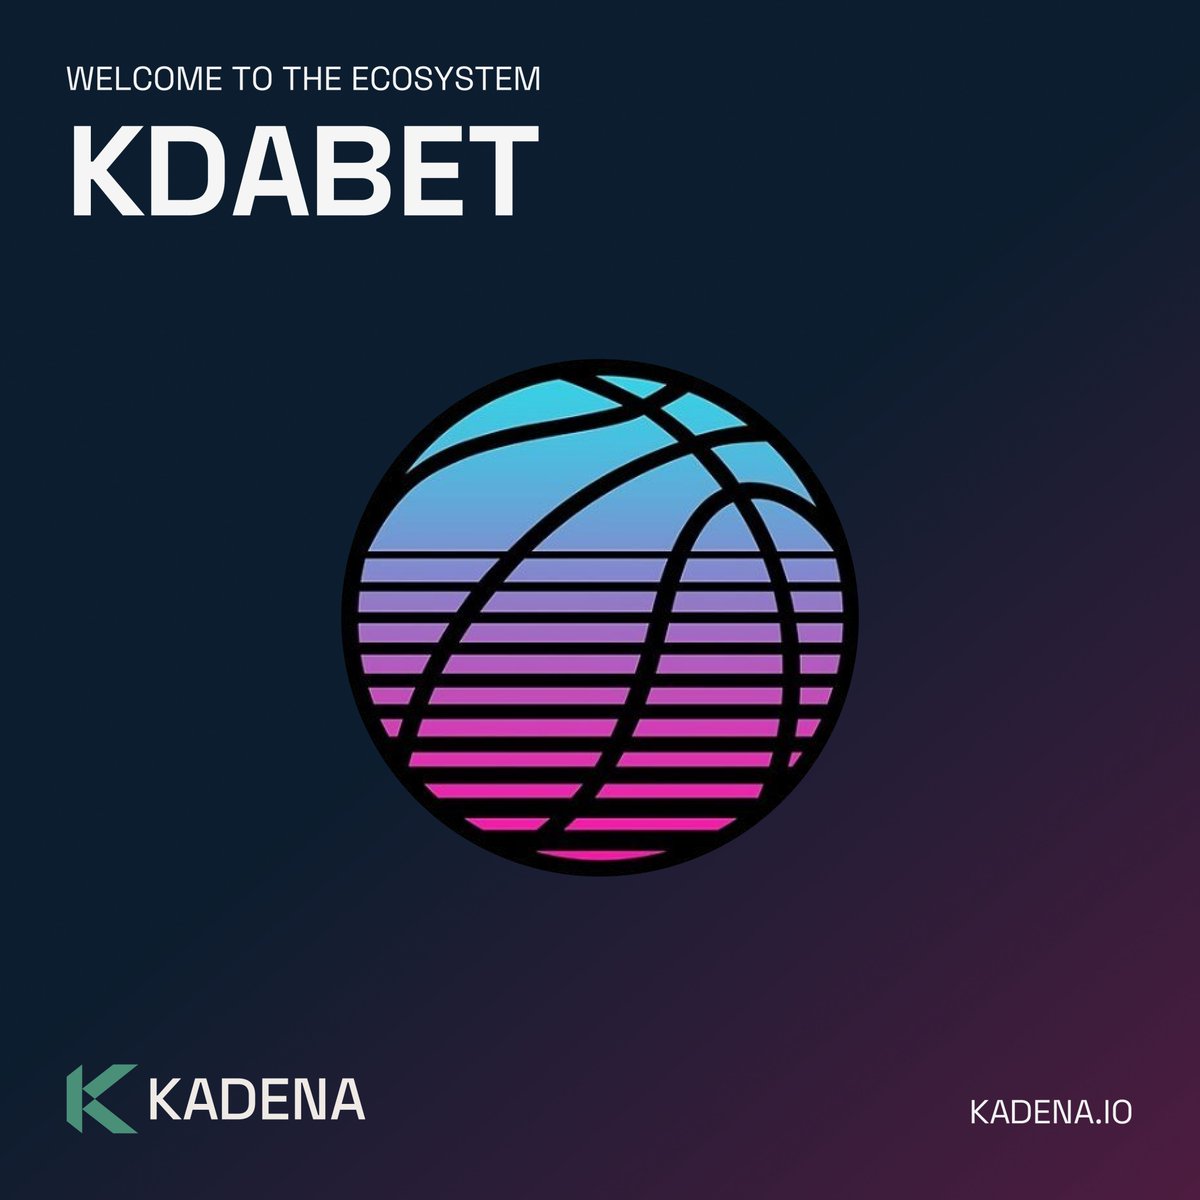 We’re excited to officially welcome @kadenabet into our ecosystem! KDABET is a U.S. E-sports, Sports, & Casino entertainment platform developing on Kadena's Blockchain. Welcome to the ecosystem, we are excited to work with you!